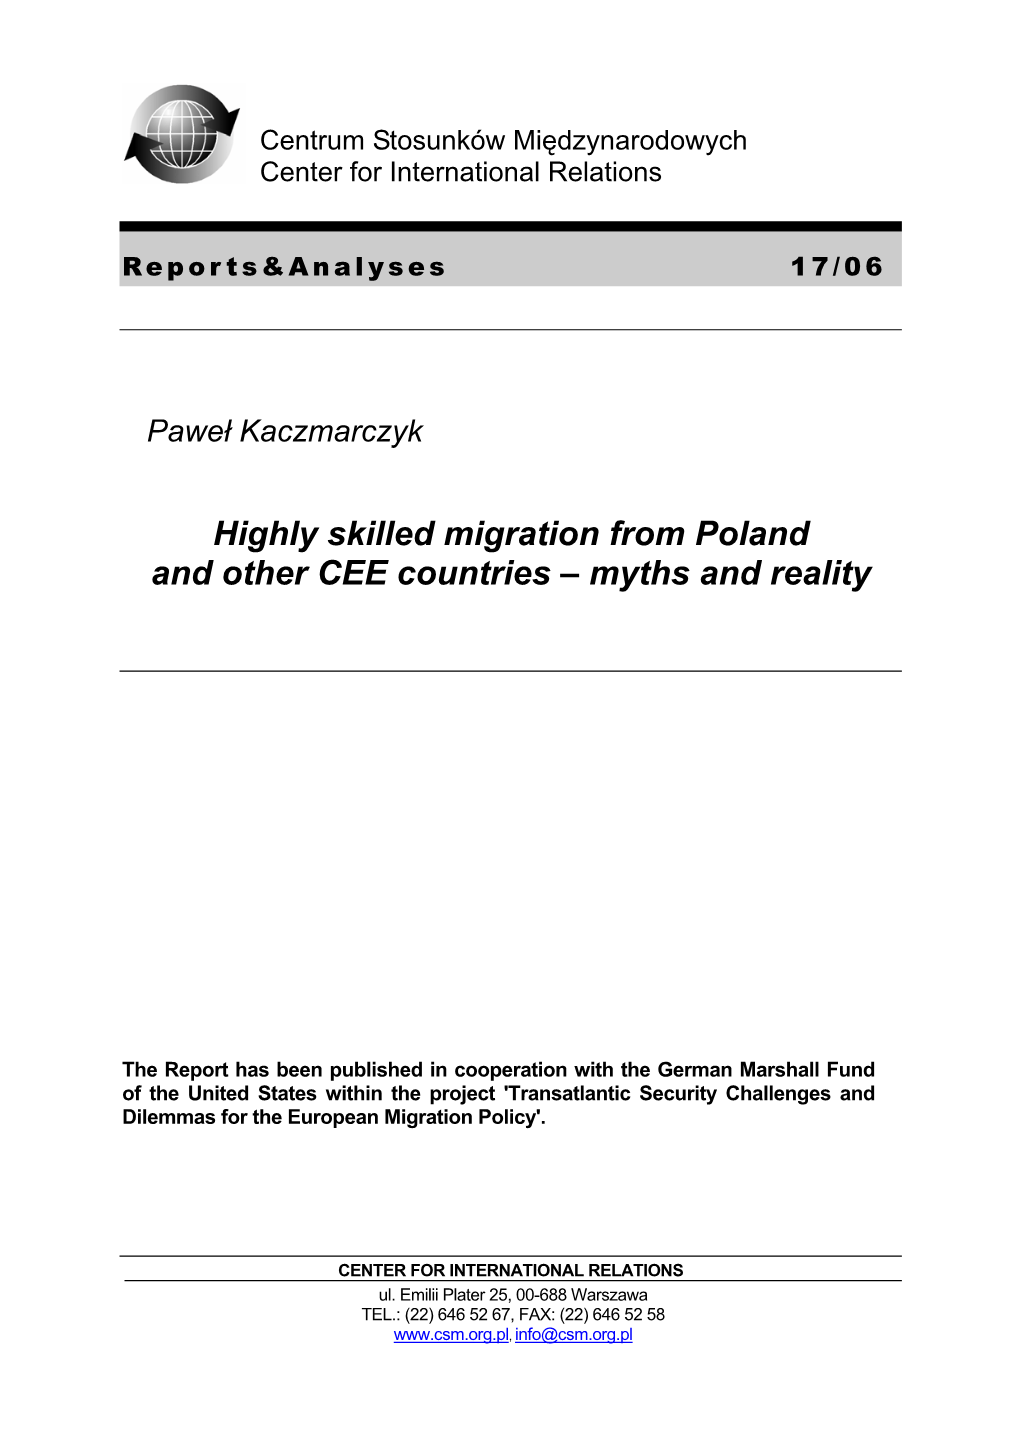 Highly Skilled Migration from Poland and Other CEE Countries – Myths and Reality